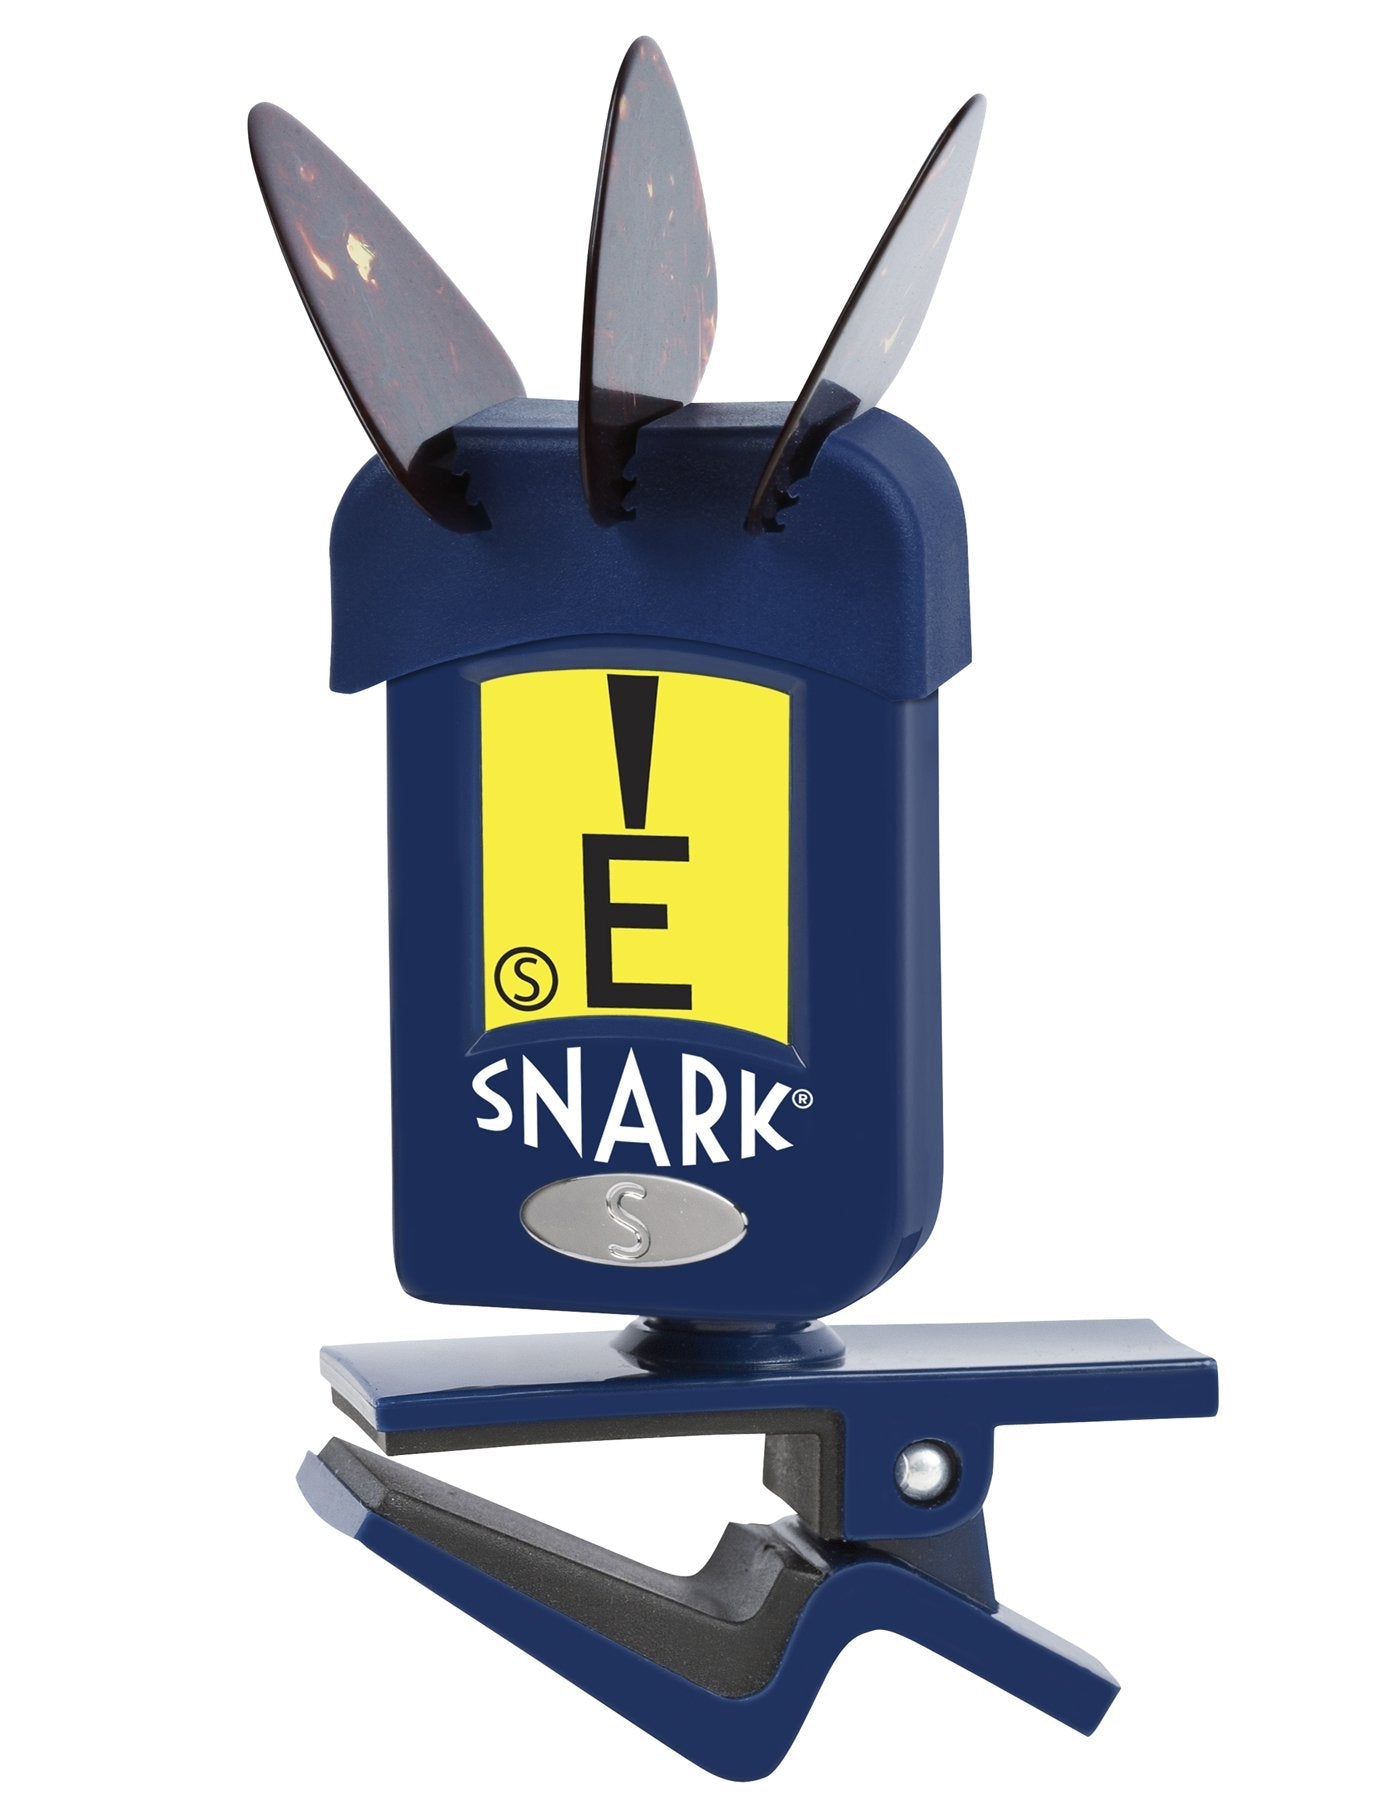 Snark Napoleon 'Clip-On' Chromatic  Guitar & Bass Tuner, Accessory for sale at Richards Guitars.